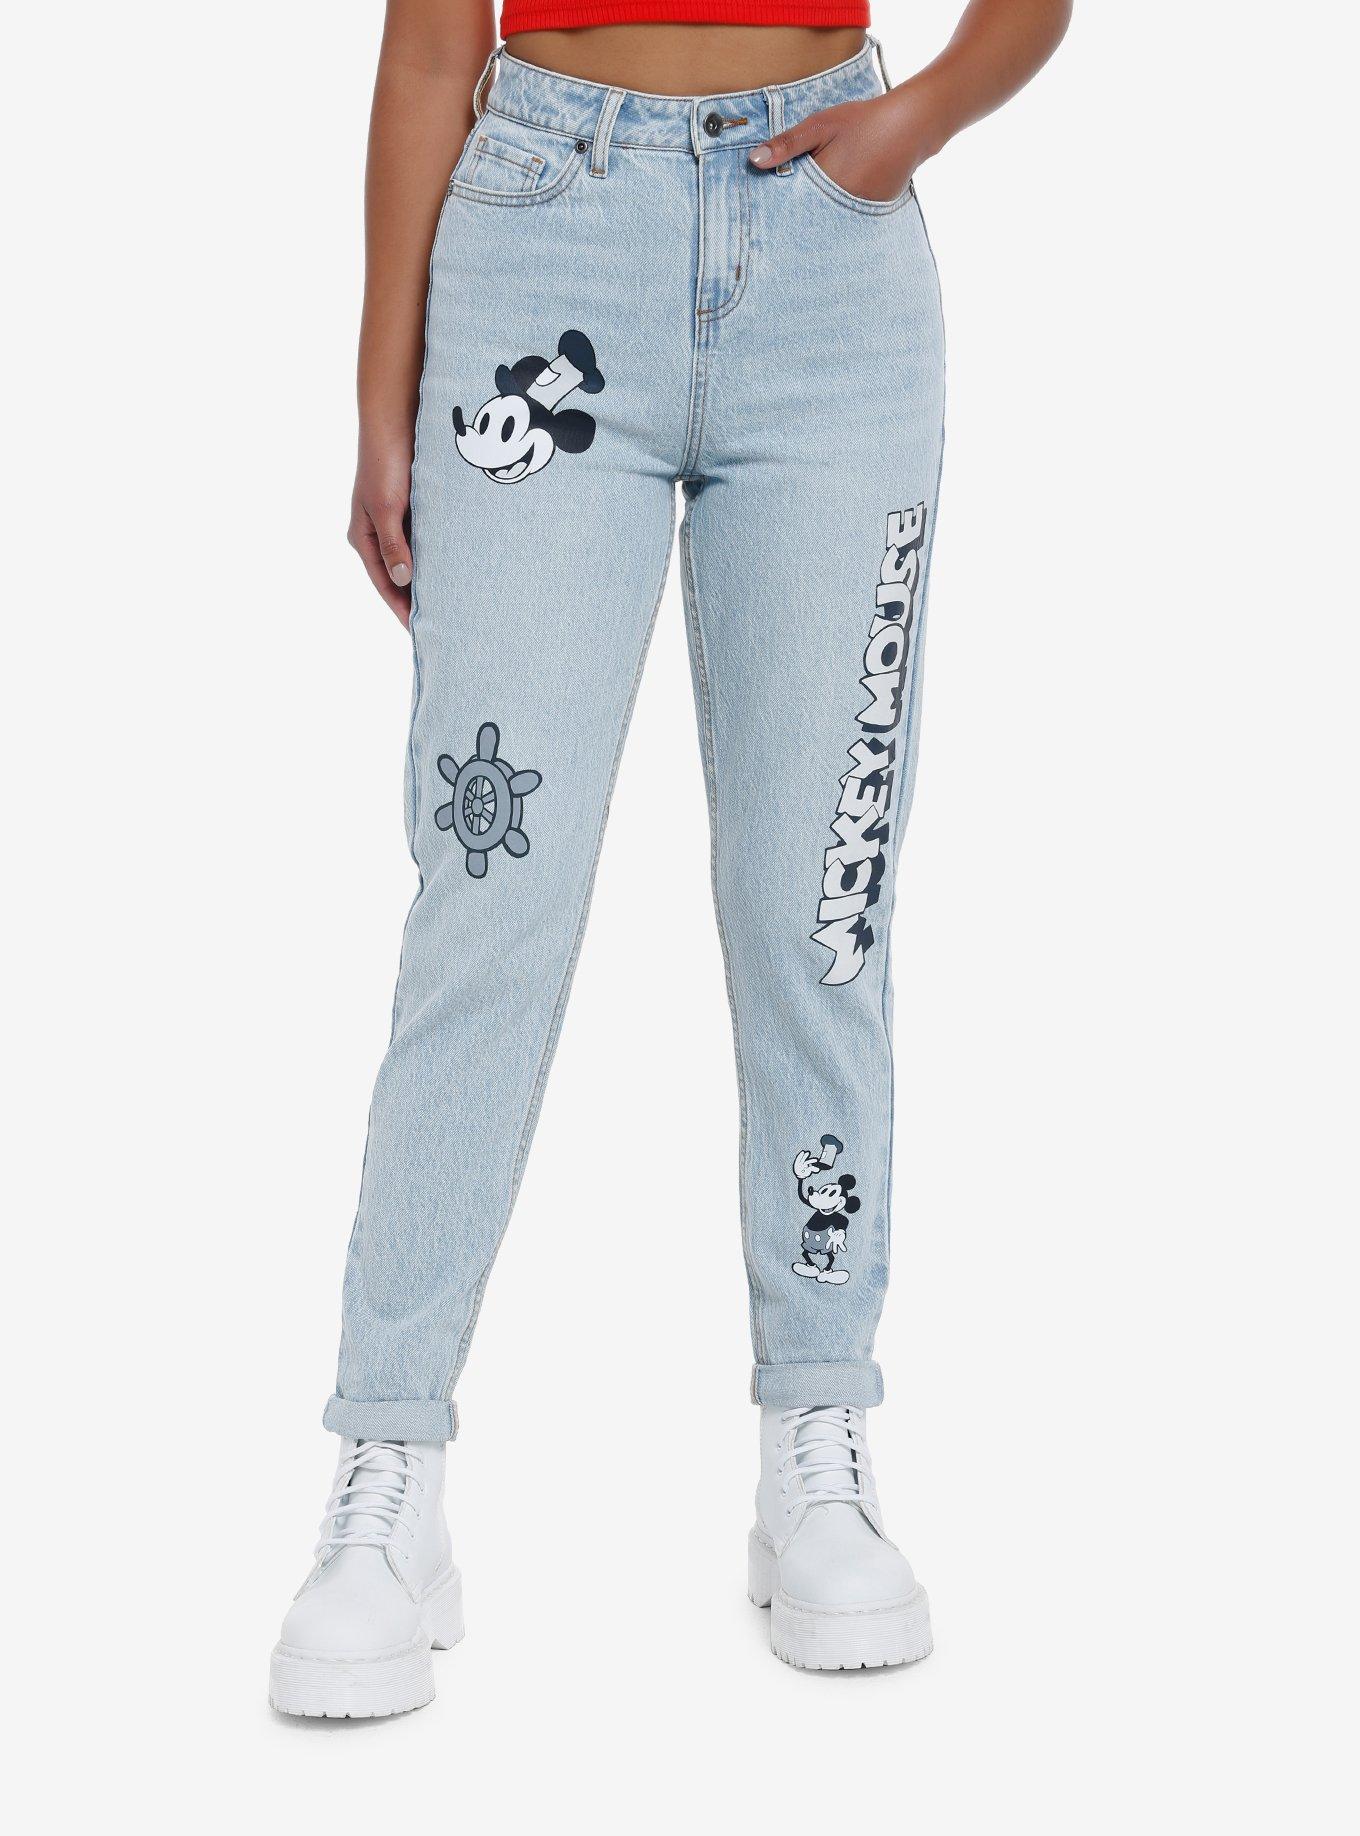 Disney Mickey Mouse Steamboat Willie Mom Jeans | Her Universe